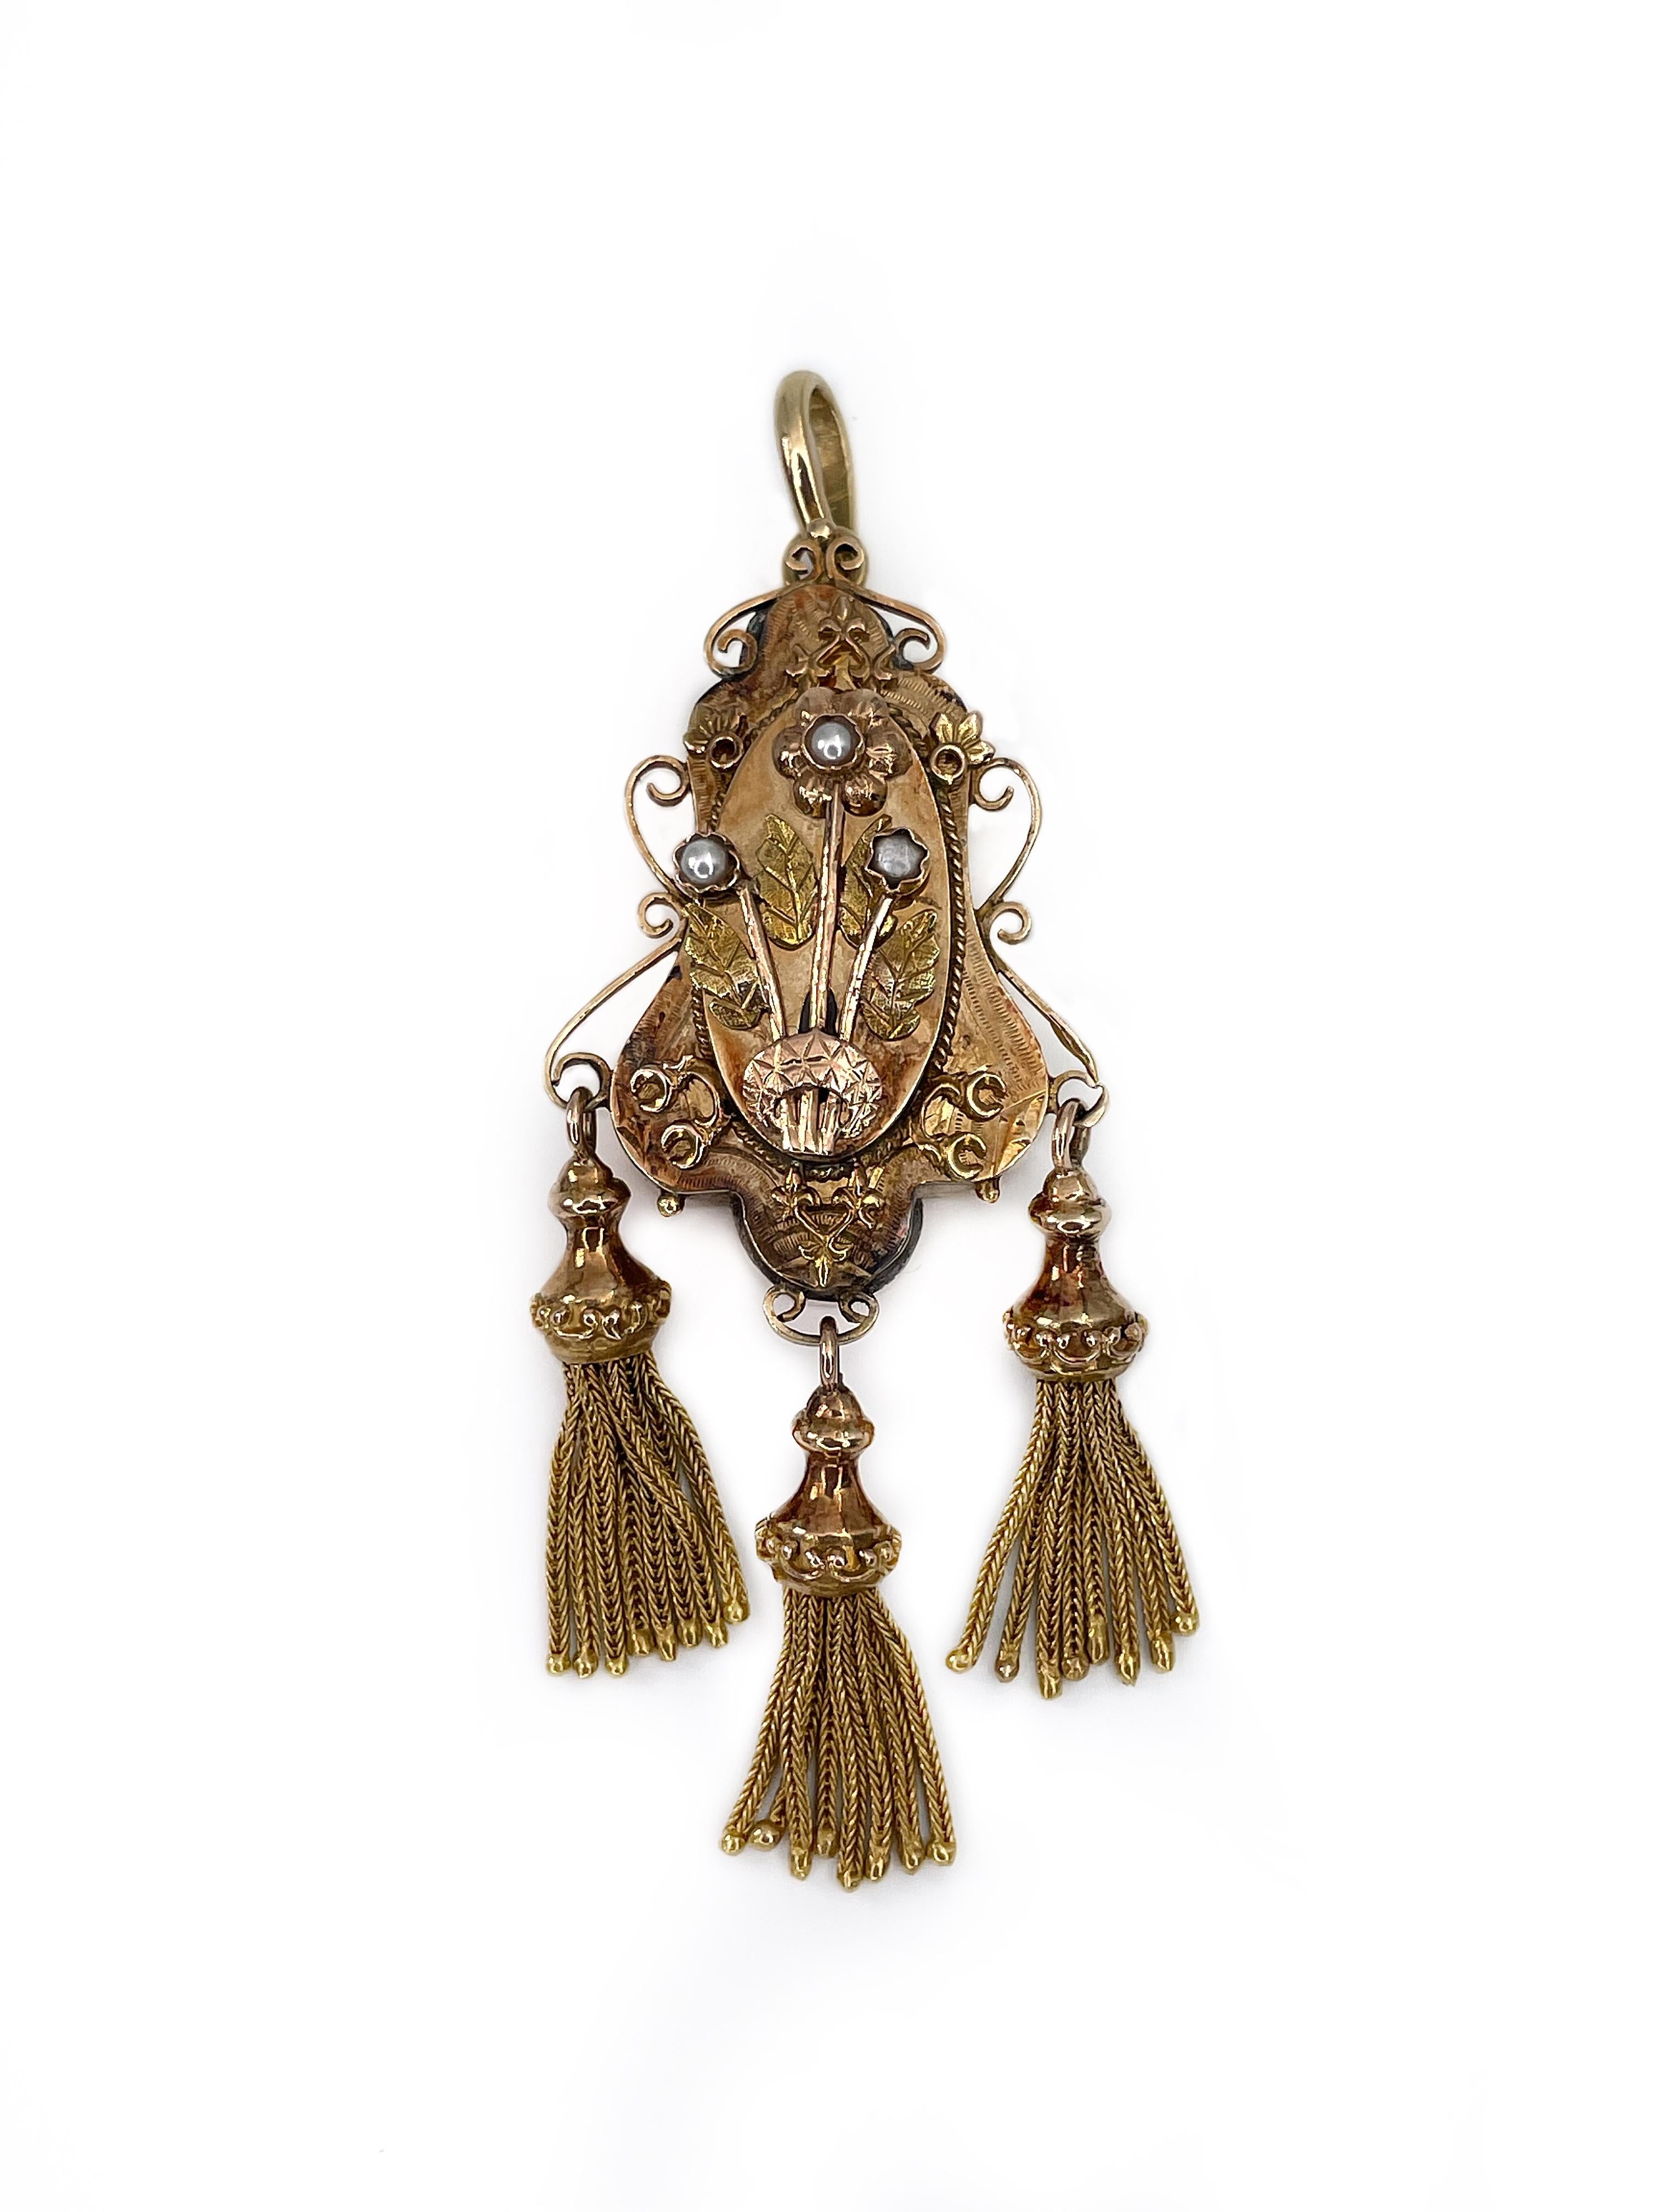 It is a stunning Victorian pendant crafted in 15K yellow gold. It features three seed pearls incorporated into a romantic and rich floral design. The piece is dynamic because of charming tassels. 

Weight: 12.41g
Size: 7x2.5cm